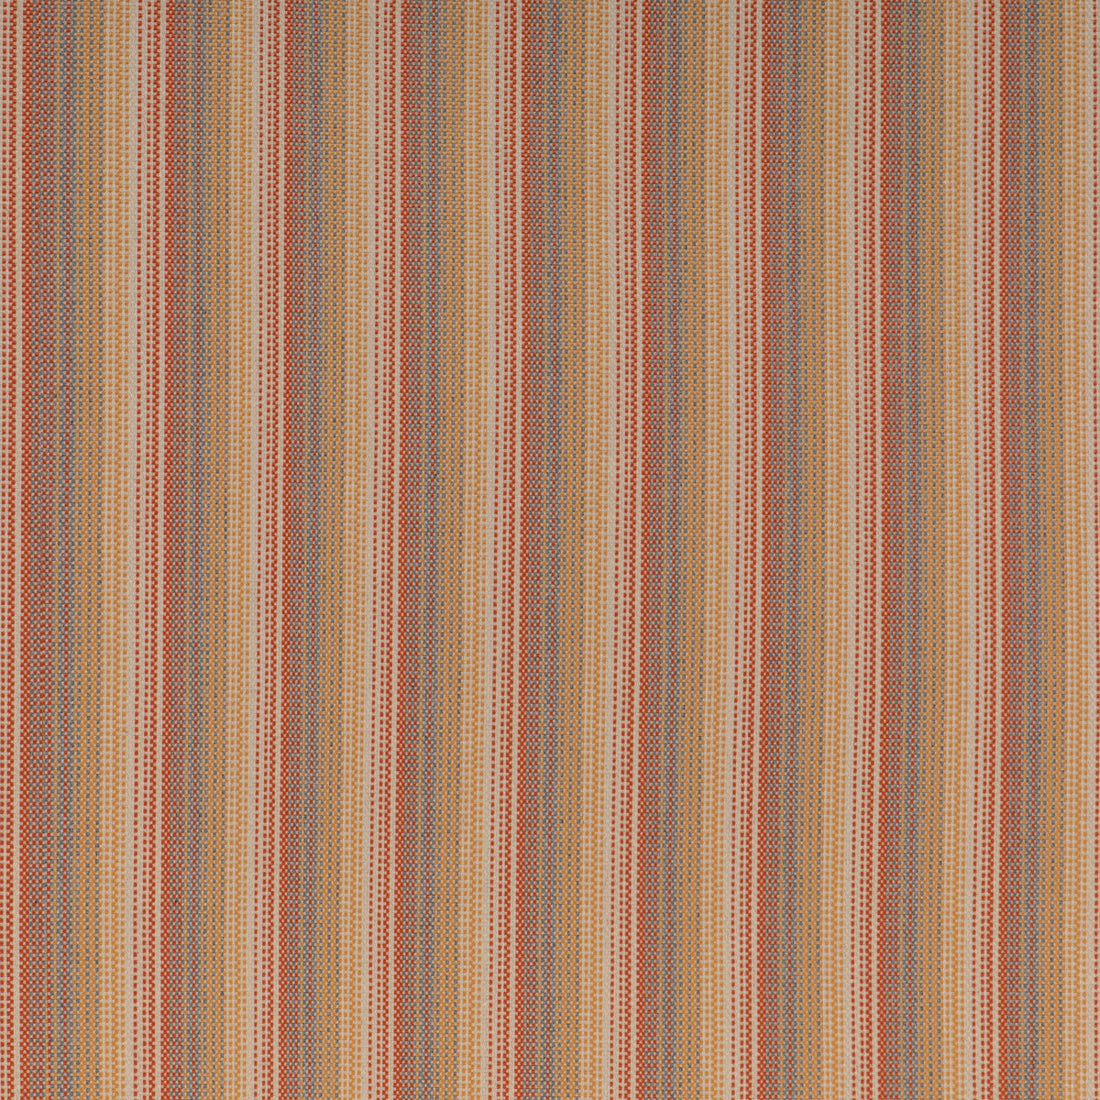 Baystreet fabric in clementine color - pattern 37068.1211.0 - by Kravet Contract in the Chesapeake collection